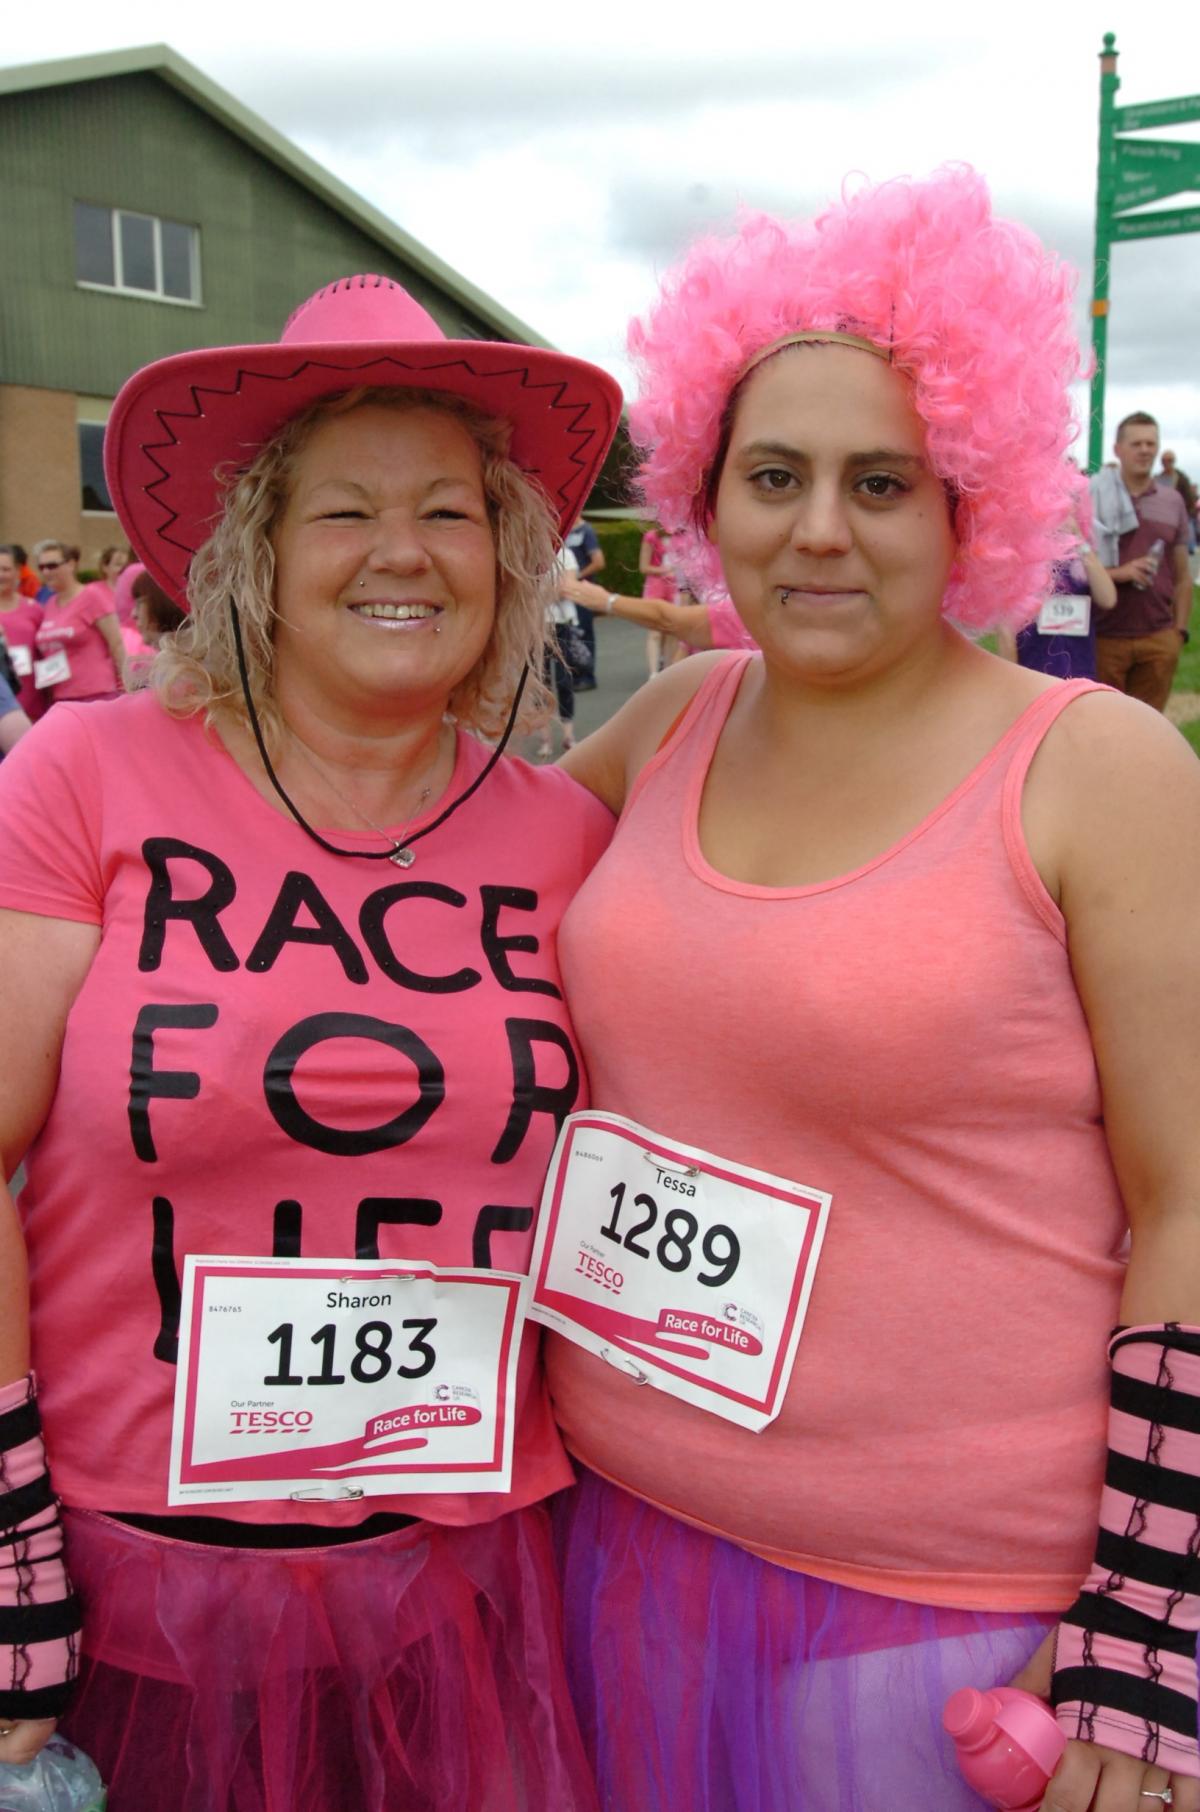 From left, Sharon Newman & Tessa Griffiths before the race. 1428_19007